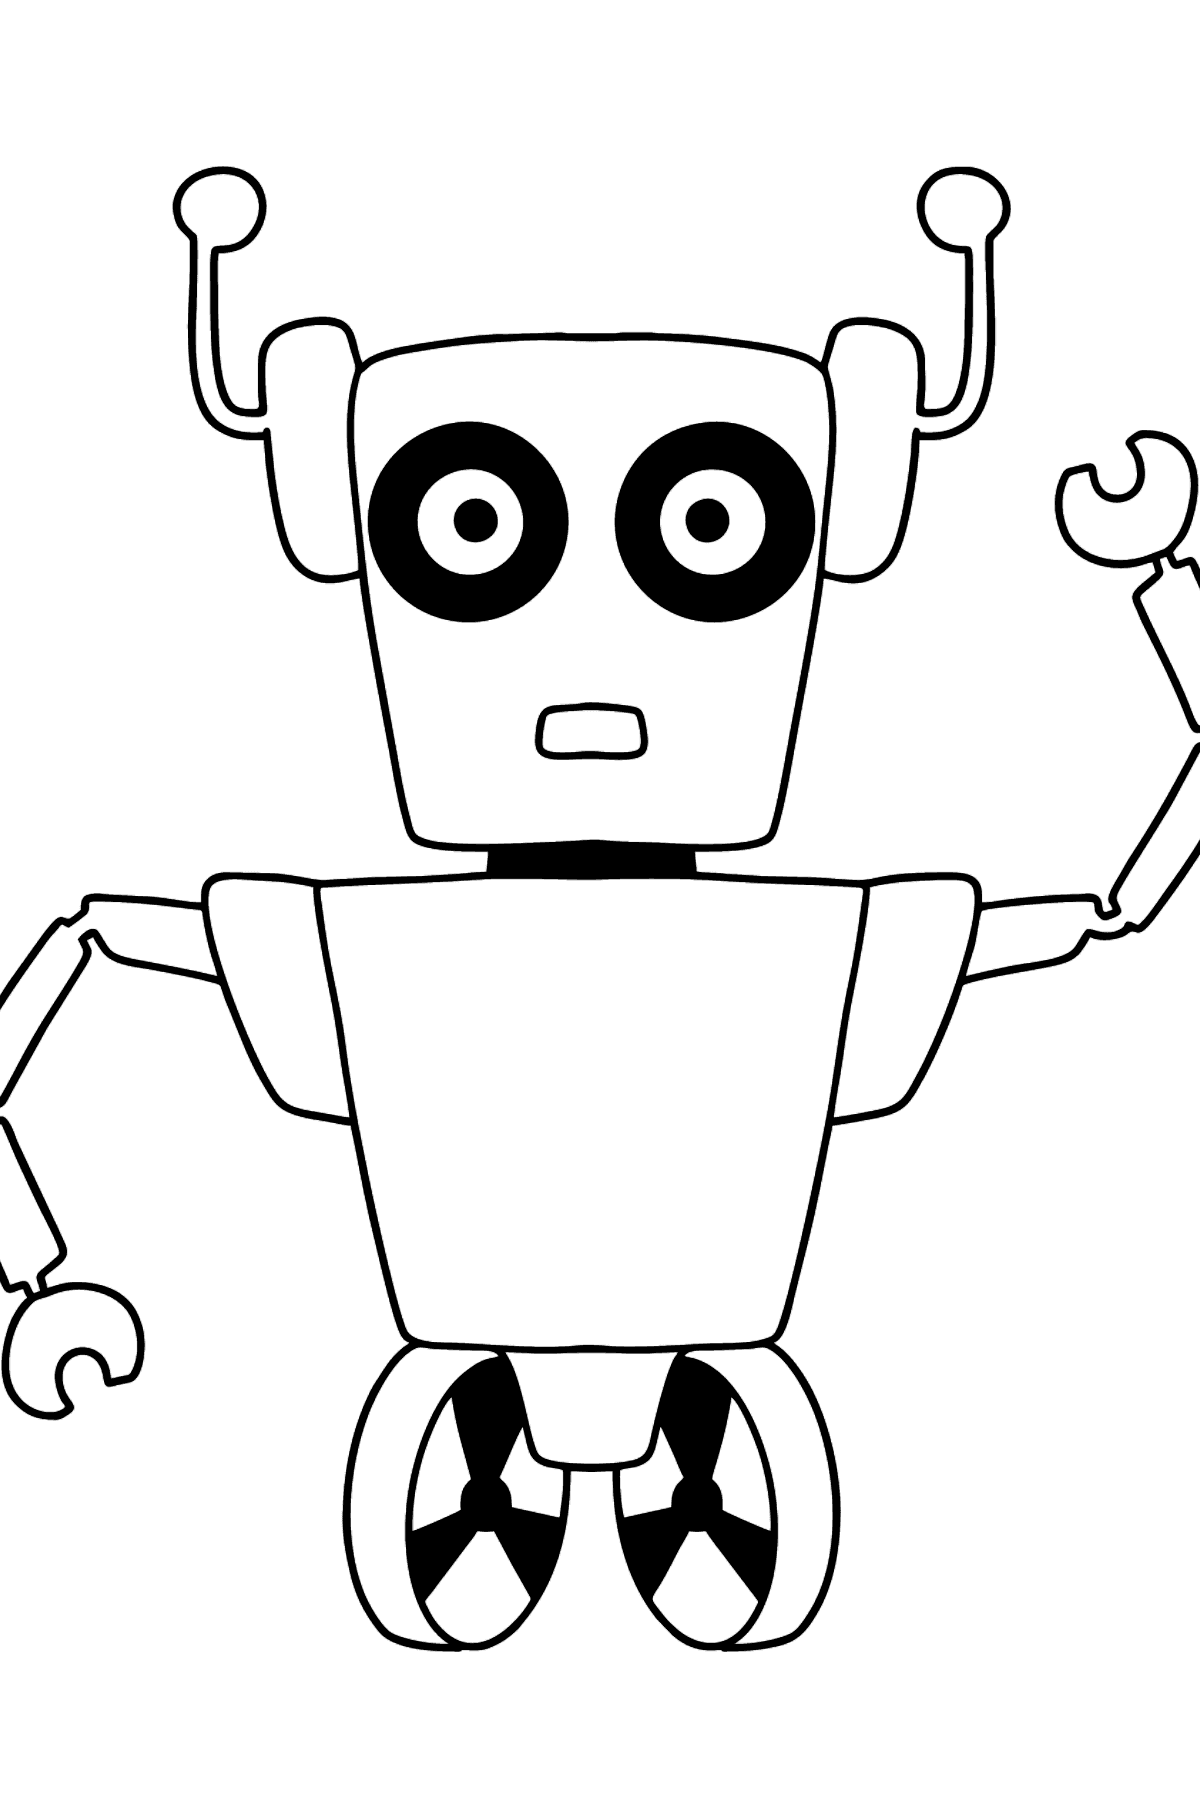 Robot on Wheels coloring page - Coloring Pages for Kids